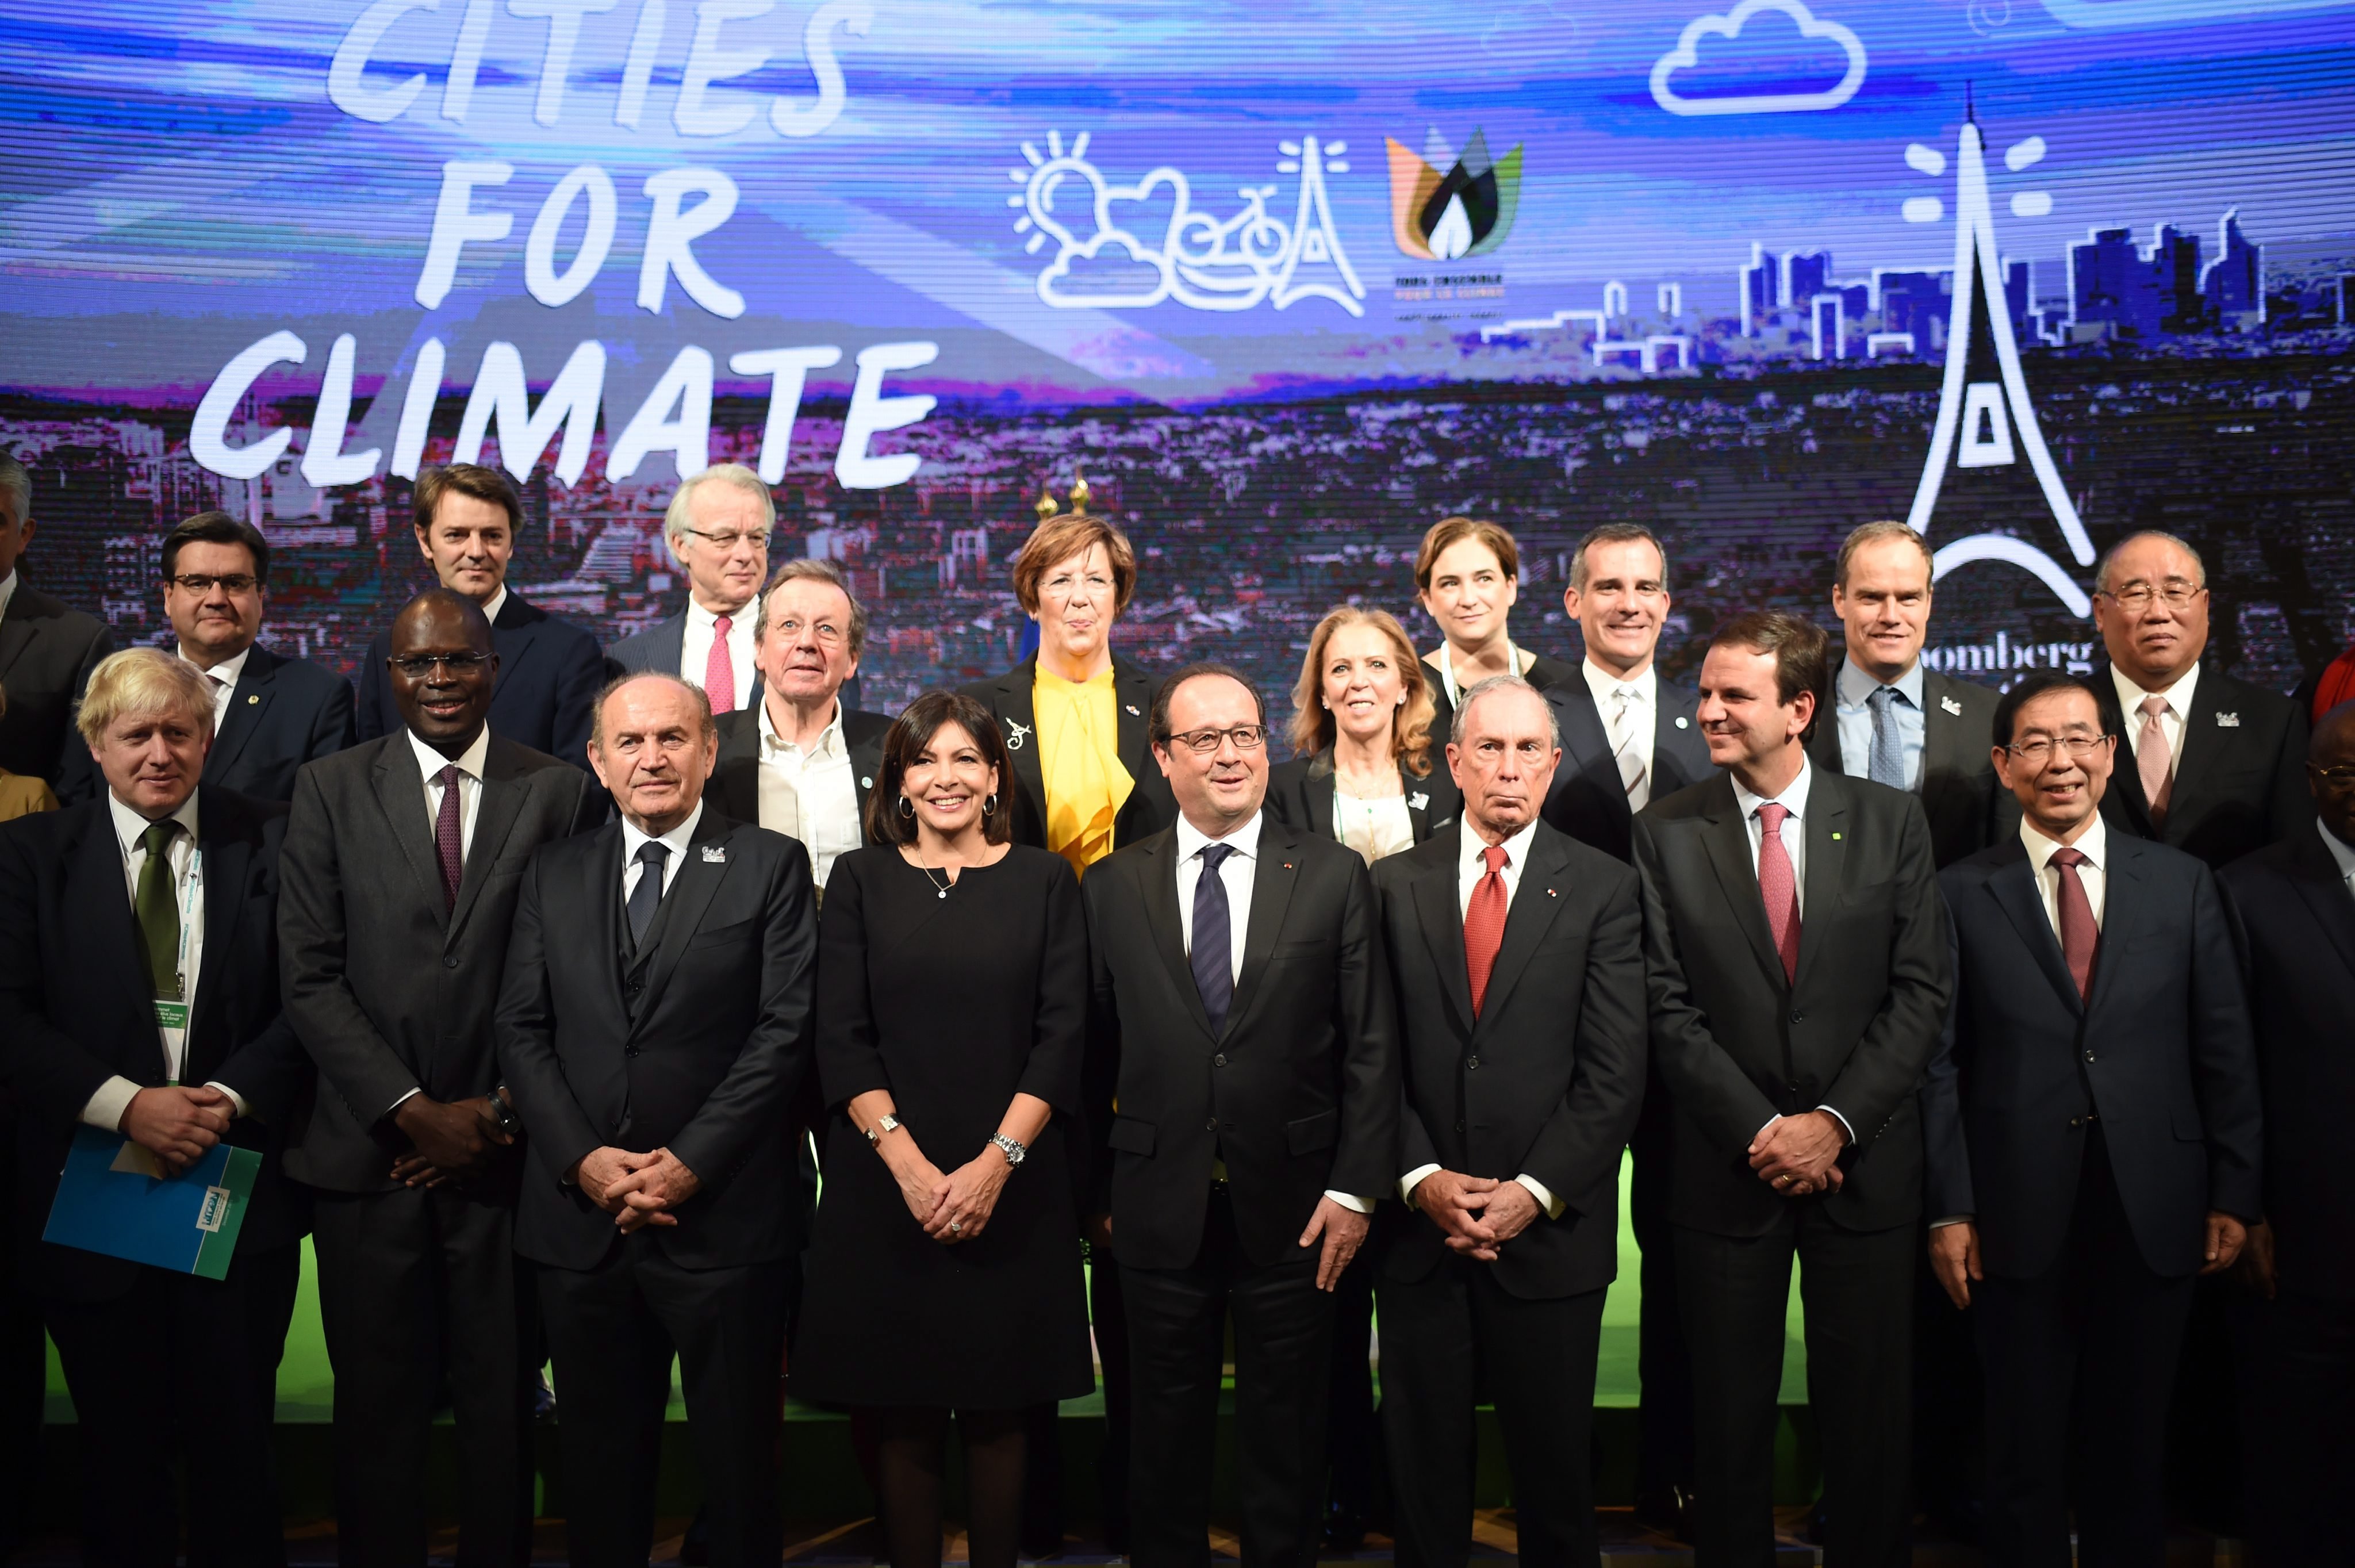 COP21 Climate Change Conference - Mayors Summit in Paris